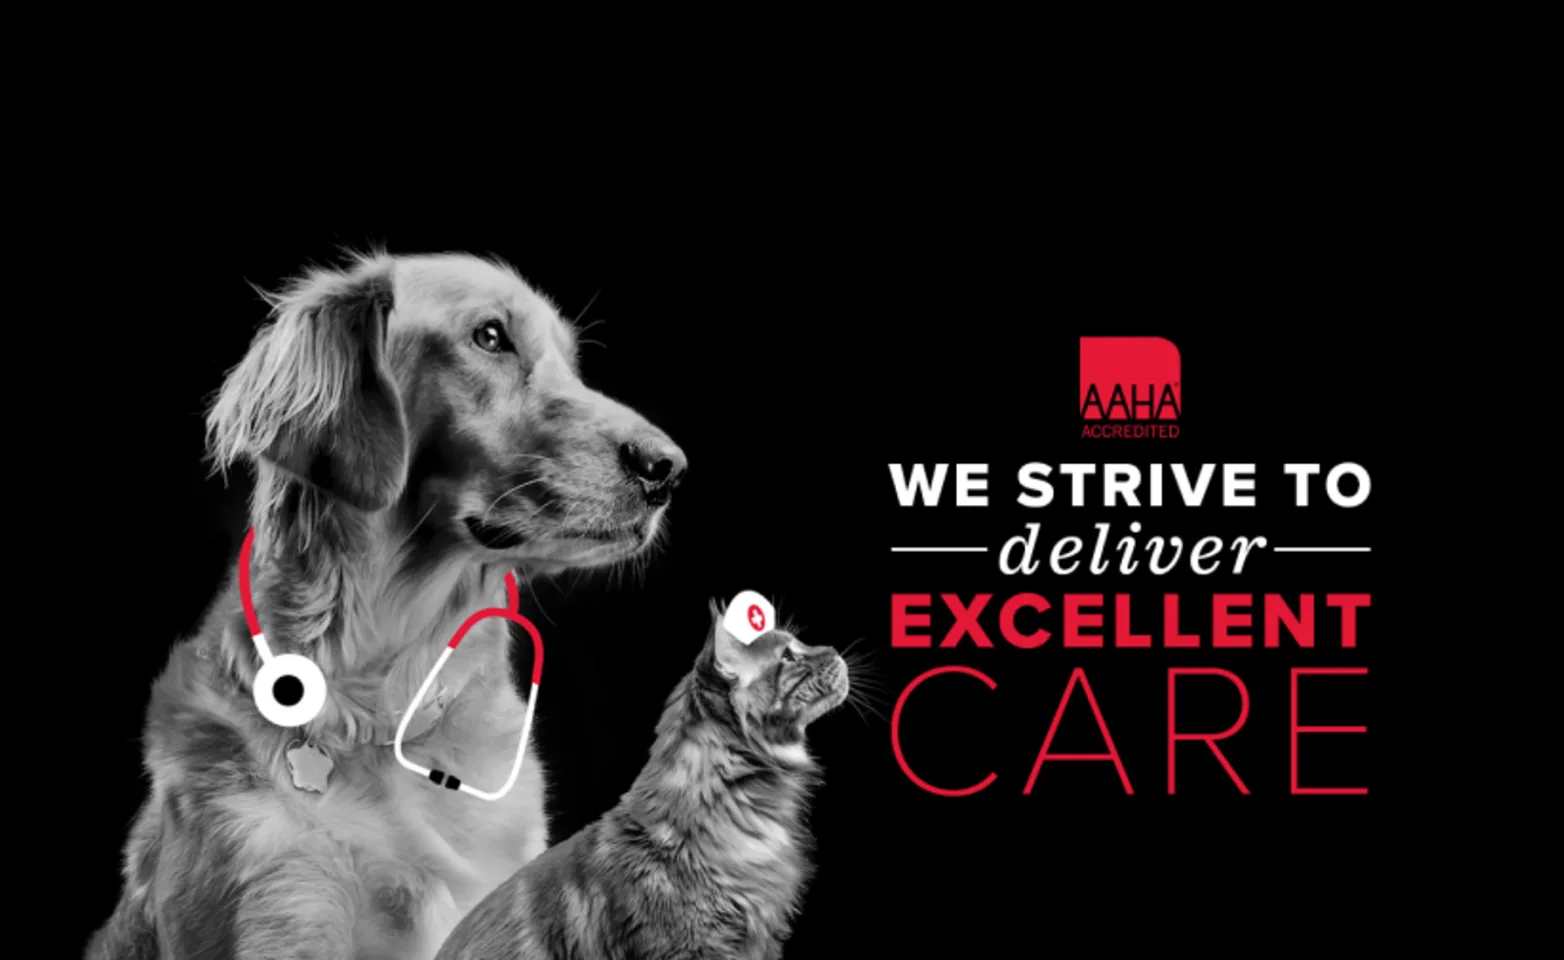 AAHA Logo with a cat and dog